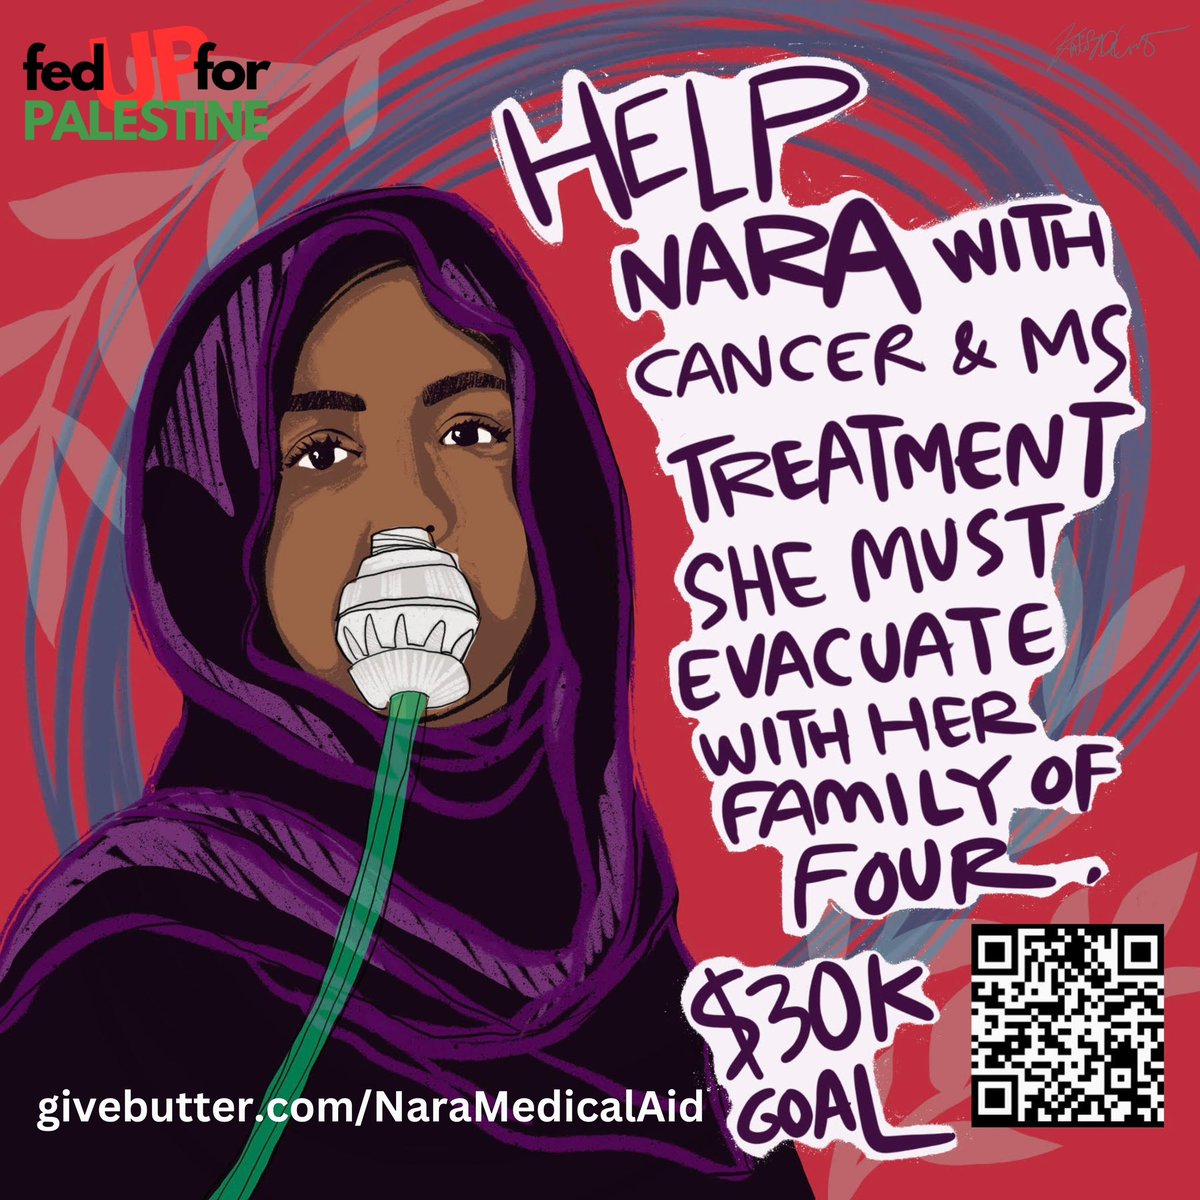 Organized by Fed up for Palestine. Would love to see Nara's story and this fundraiser gain traction. givebutter.com/naramedicalaid